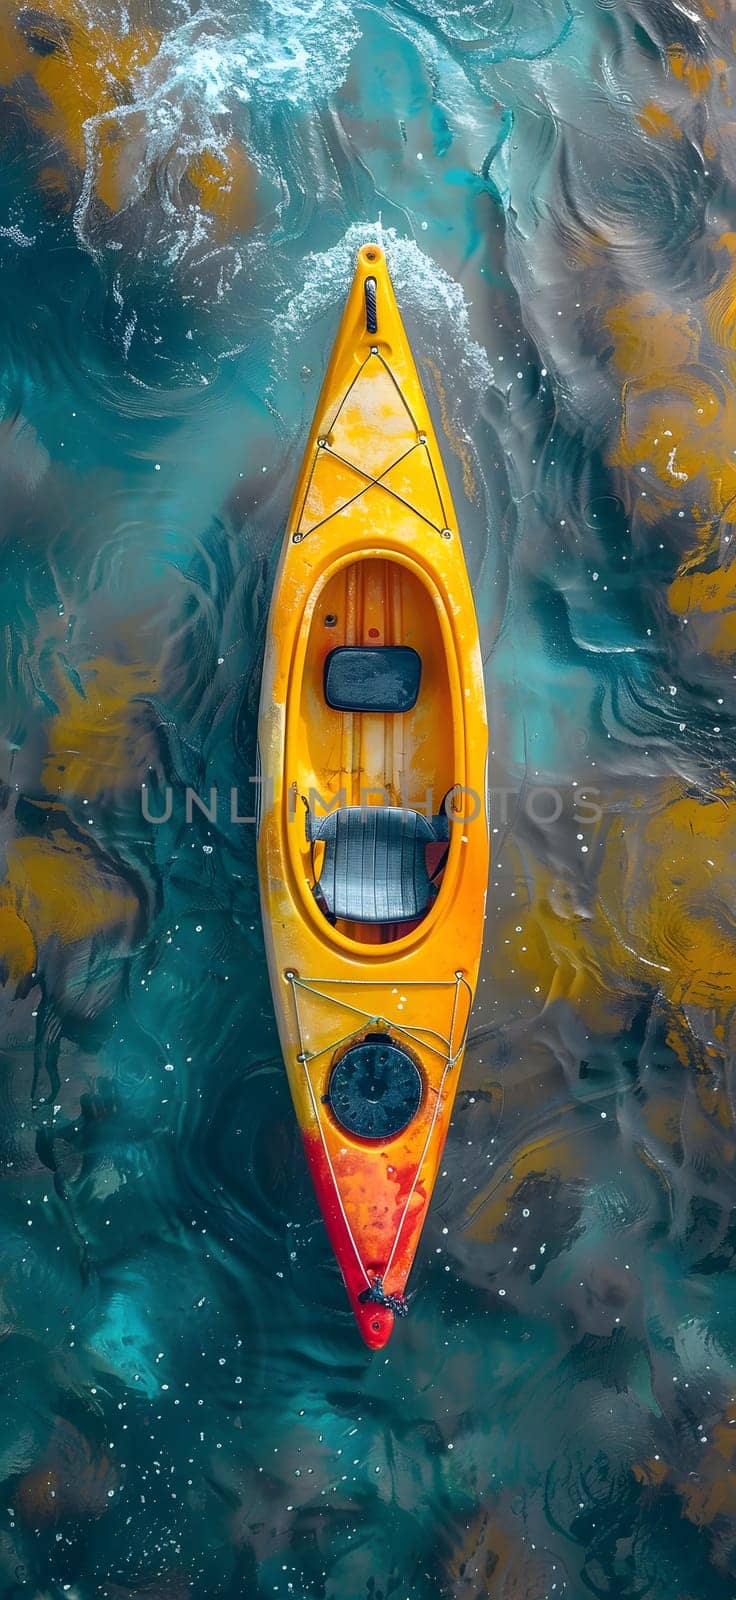 An electric blue kayak floats in the water, contrasting beautifully with the liquid paintlike surface below, creating a serene and artistic view of the watercraft in recreation